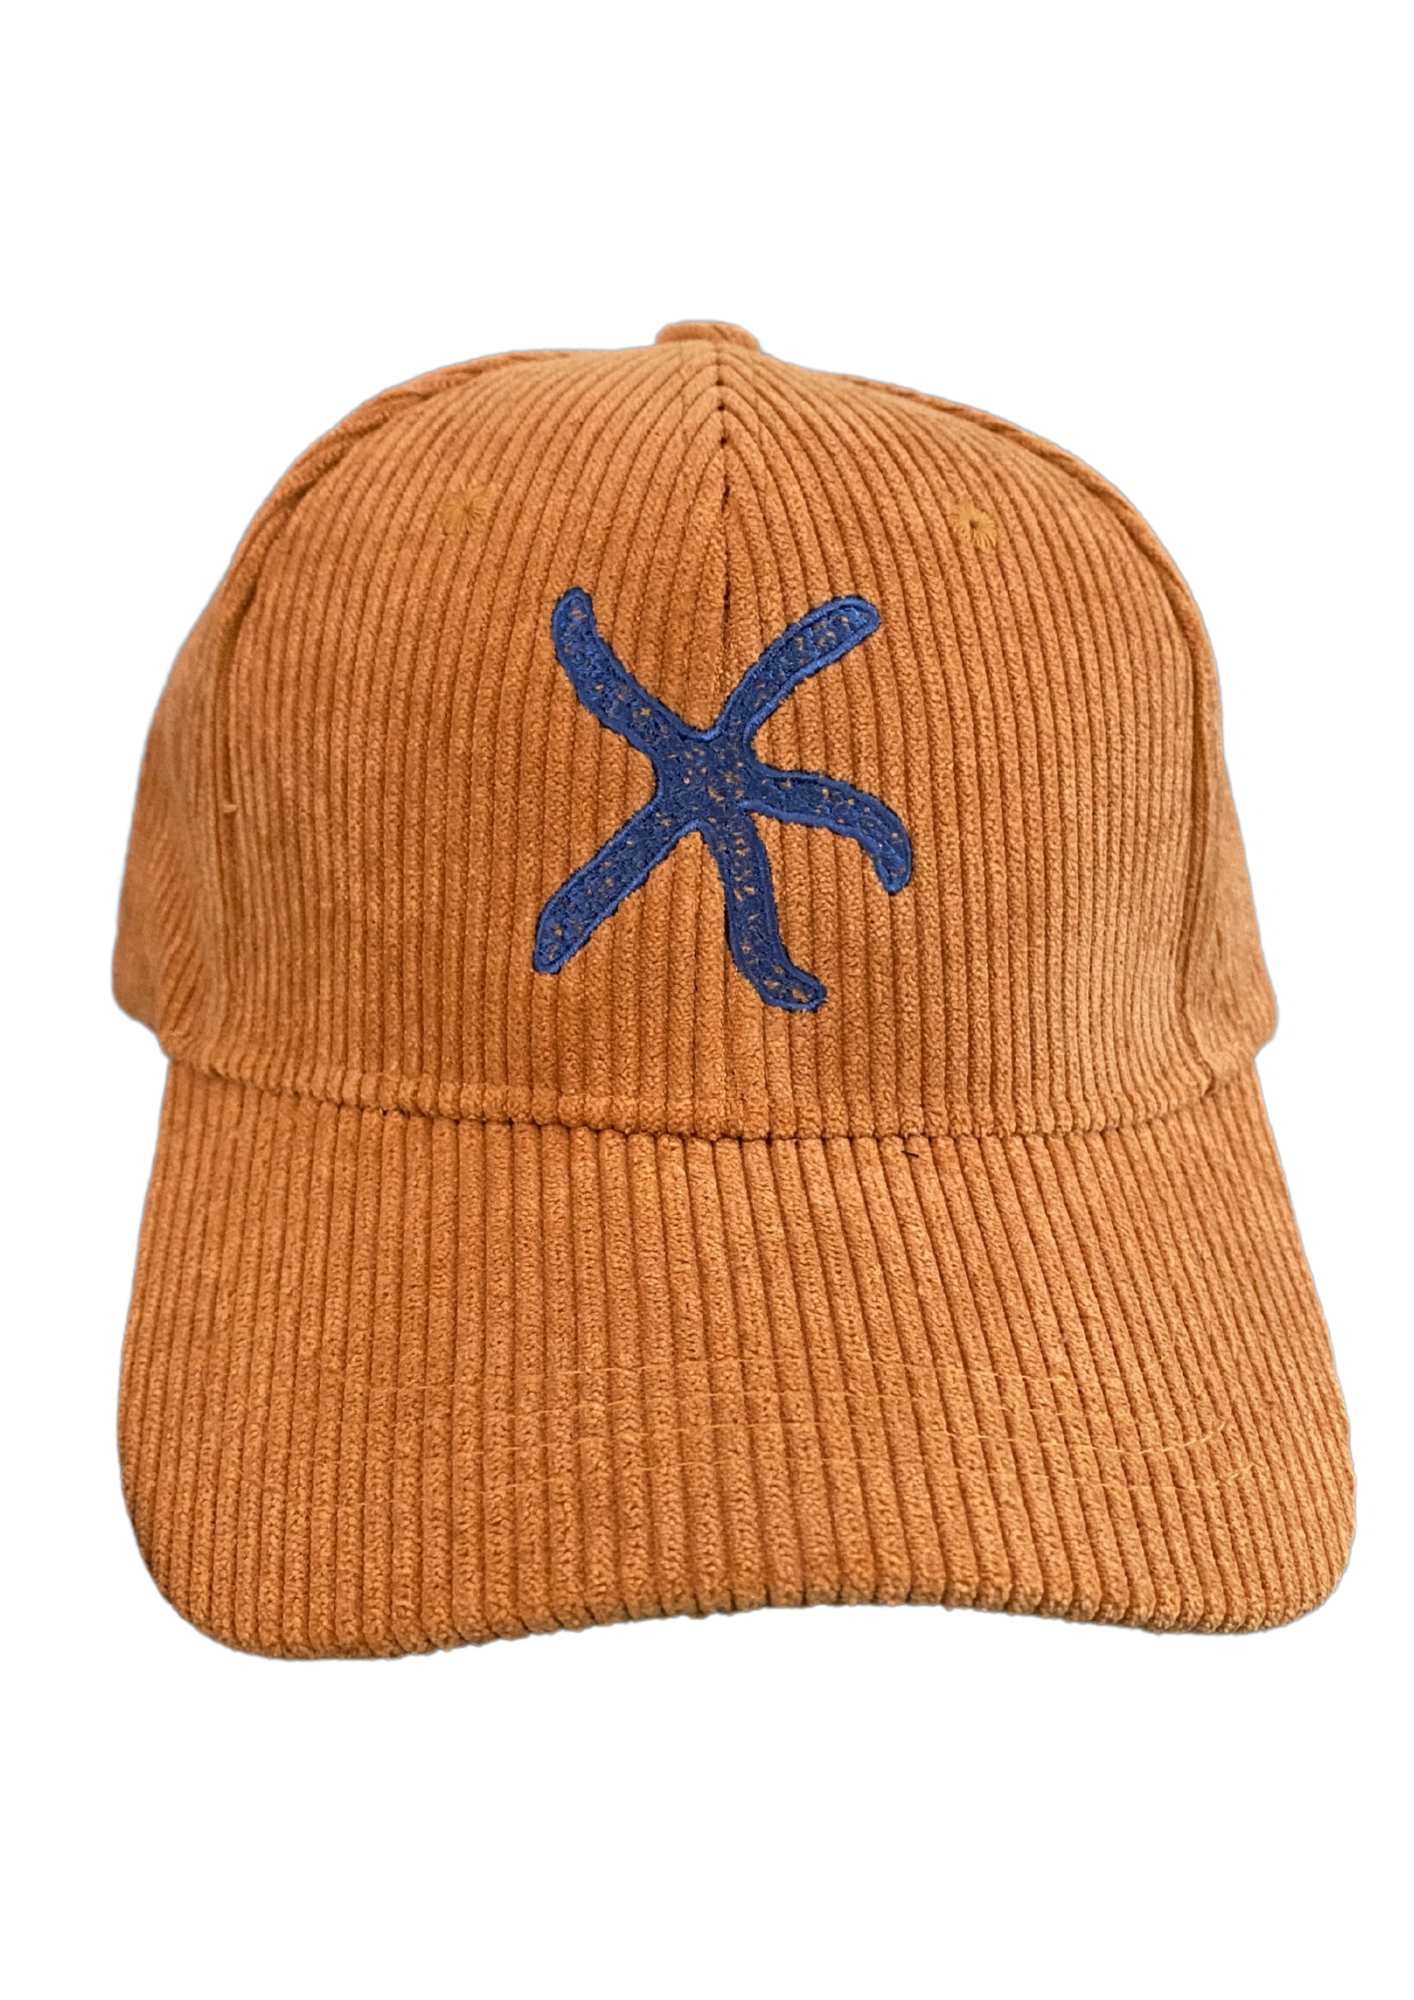 Starfish Caps - 5 colours available